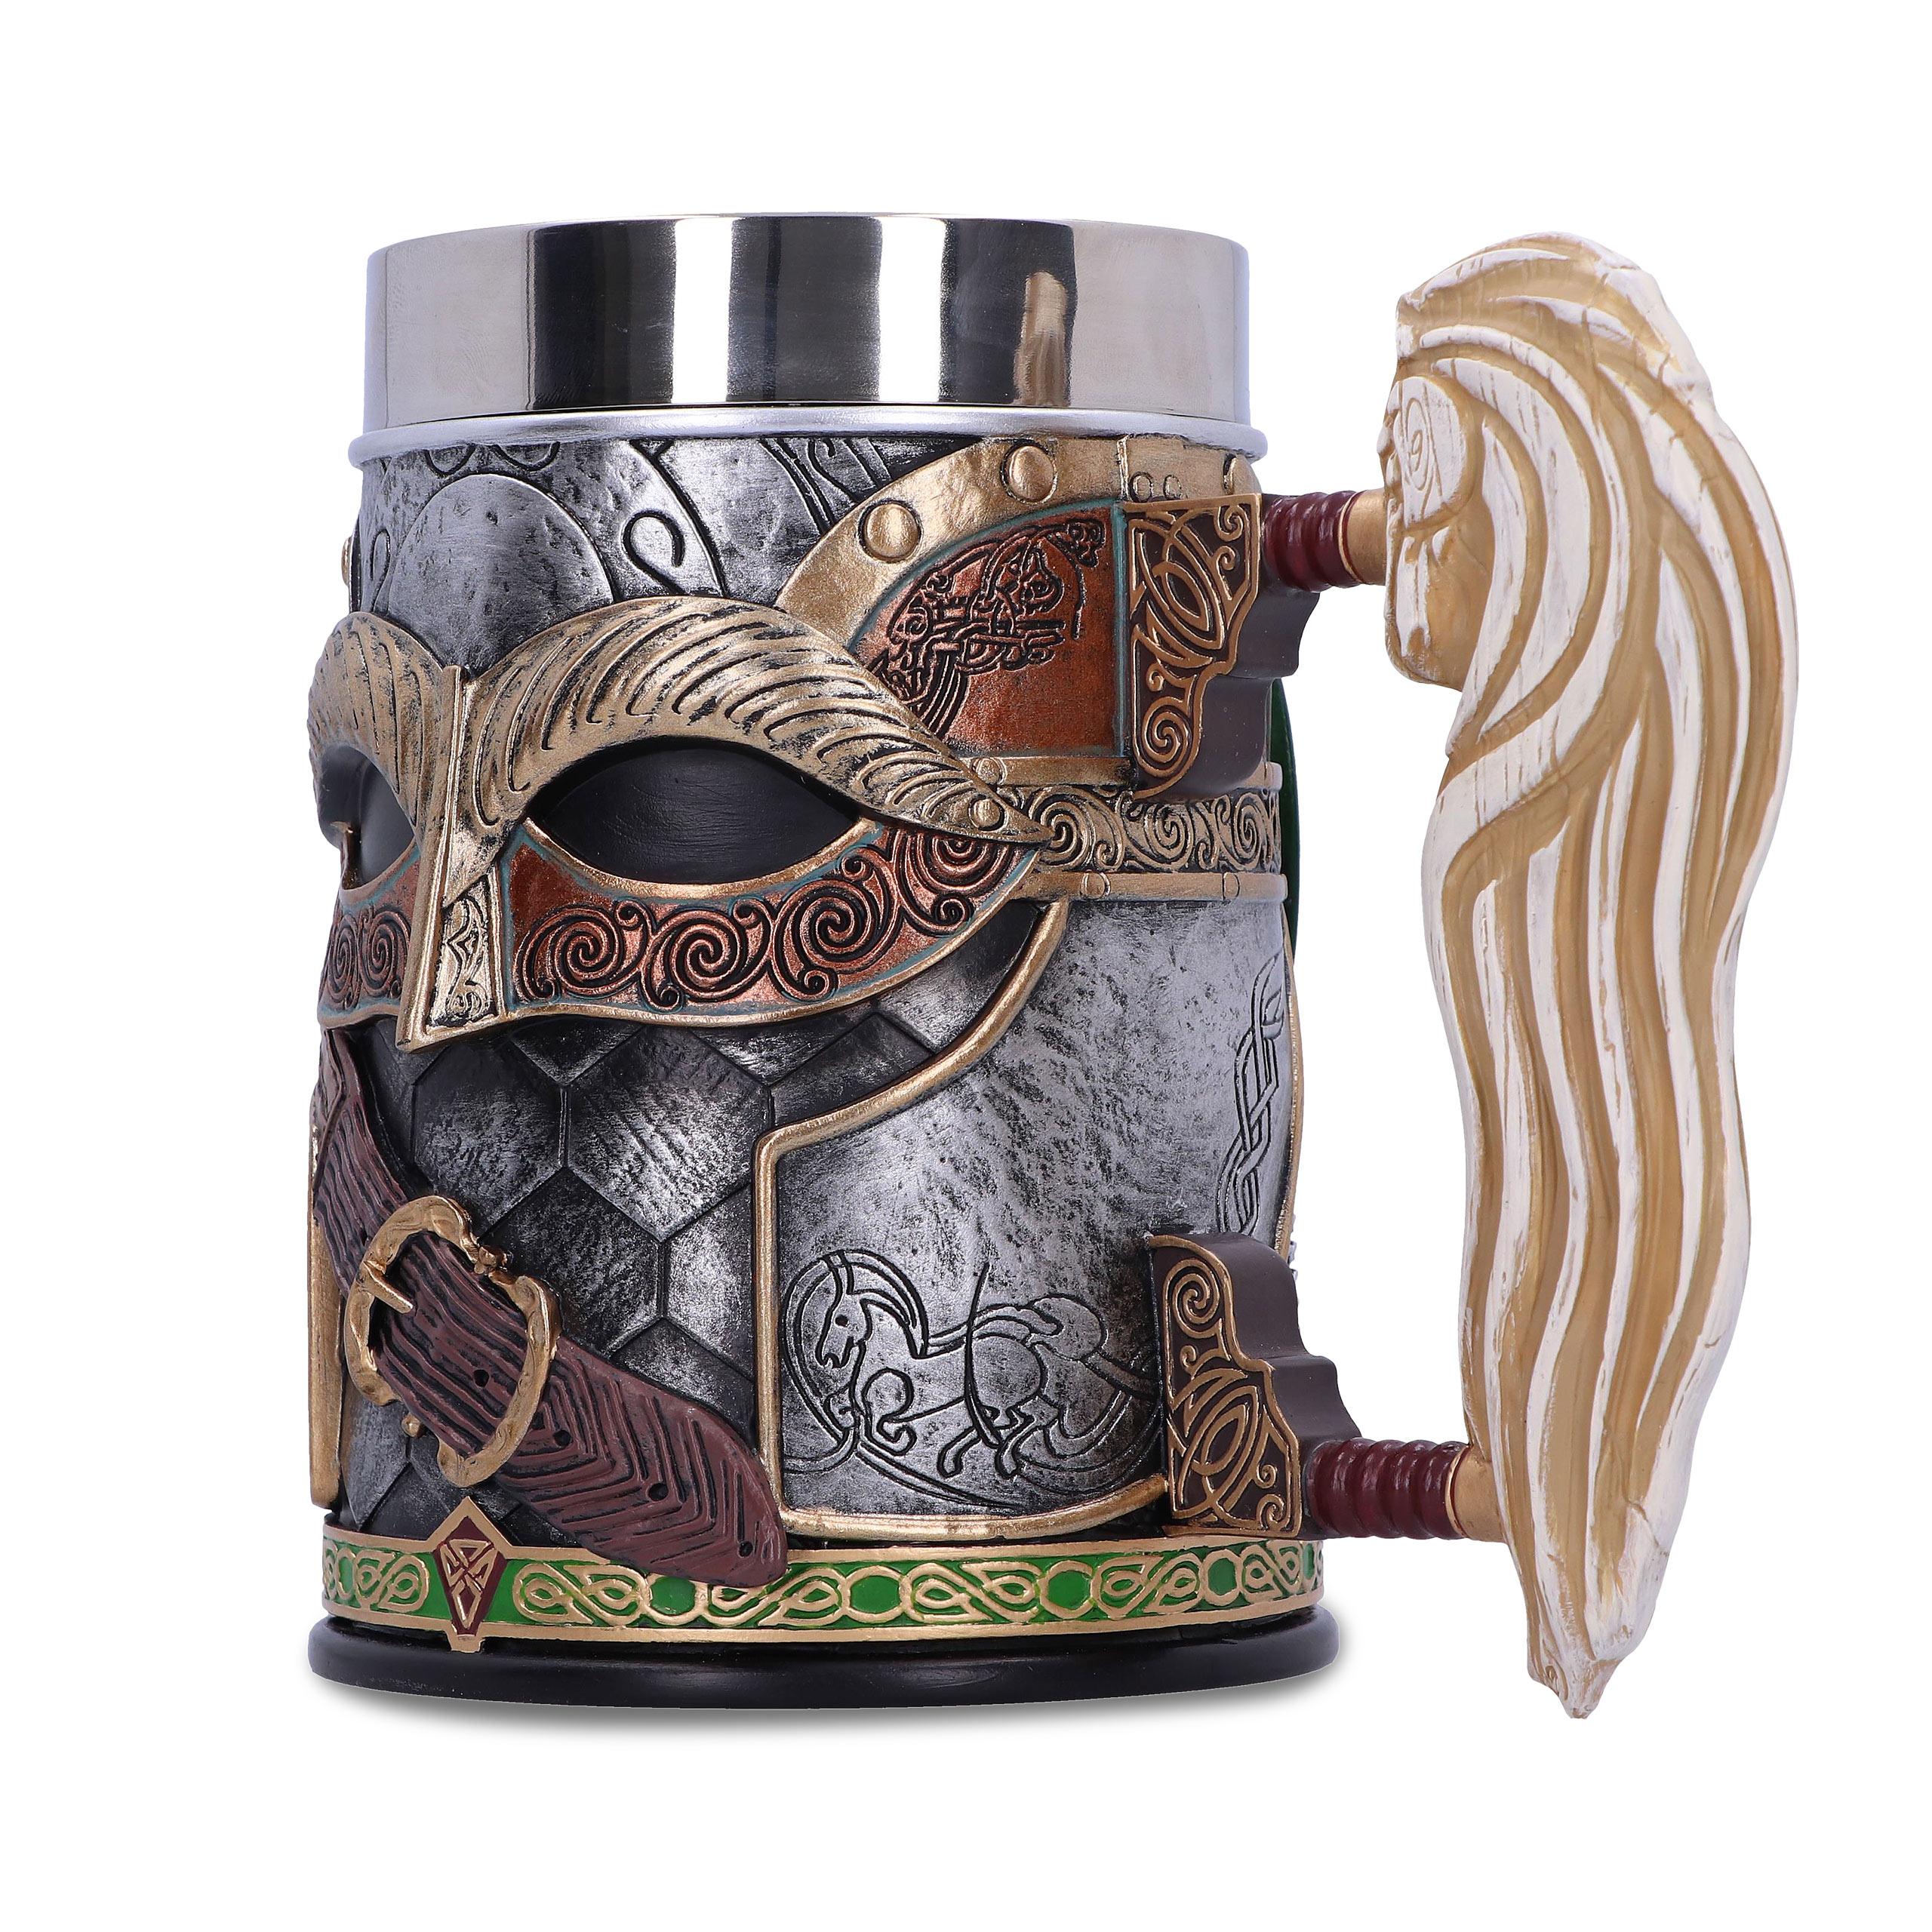 Lord of the Rings - Rohan Mug Deluxe